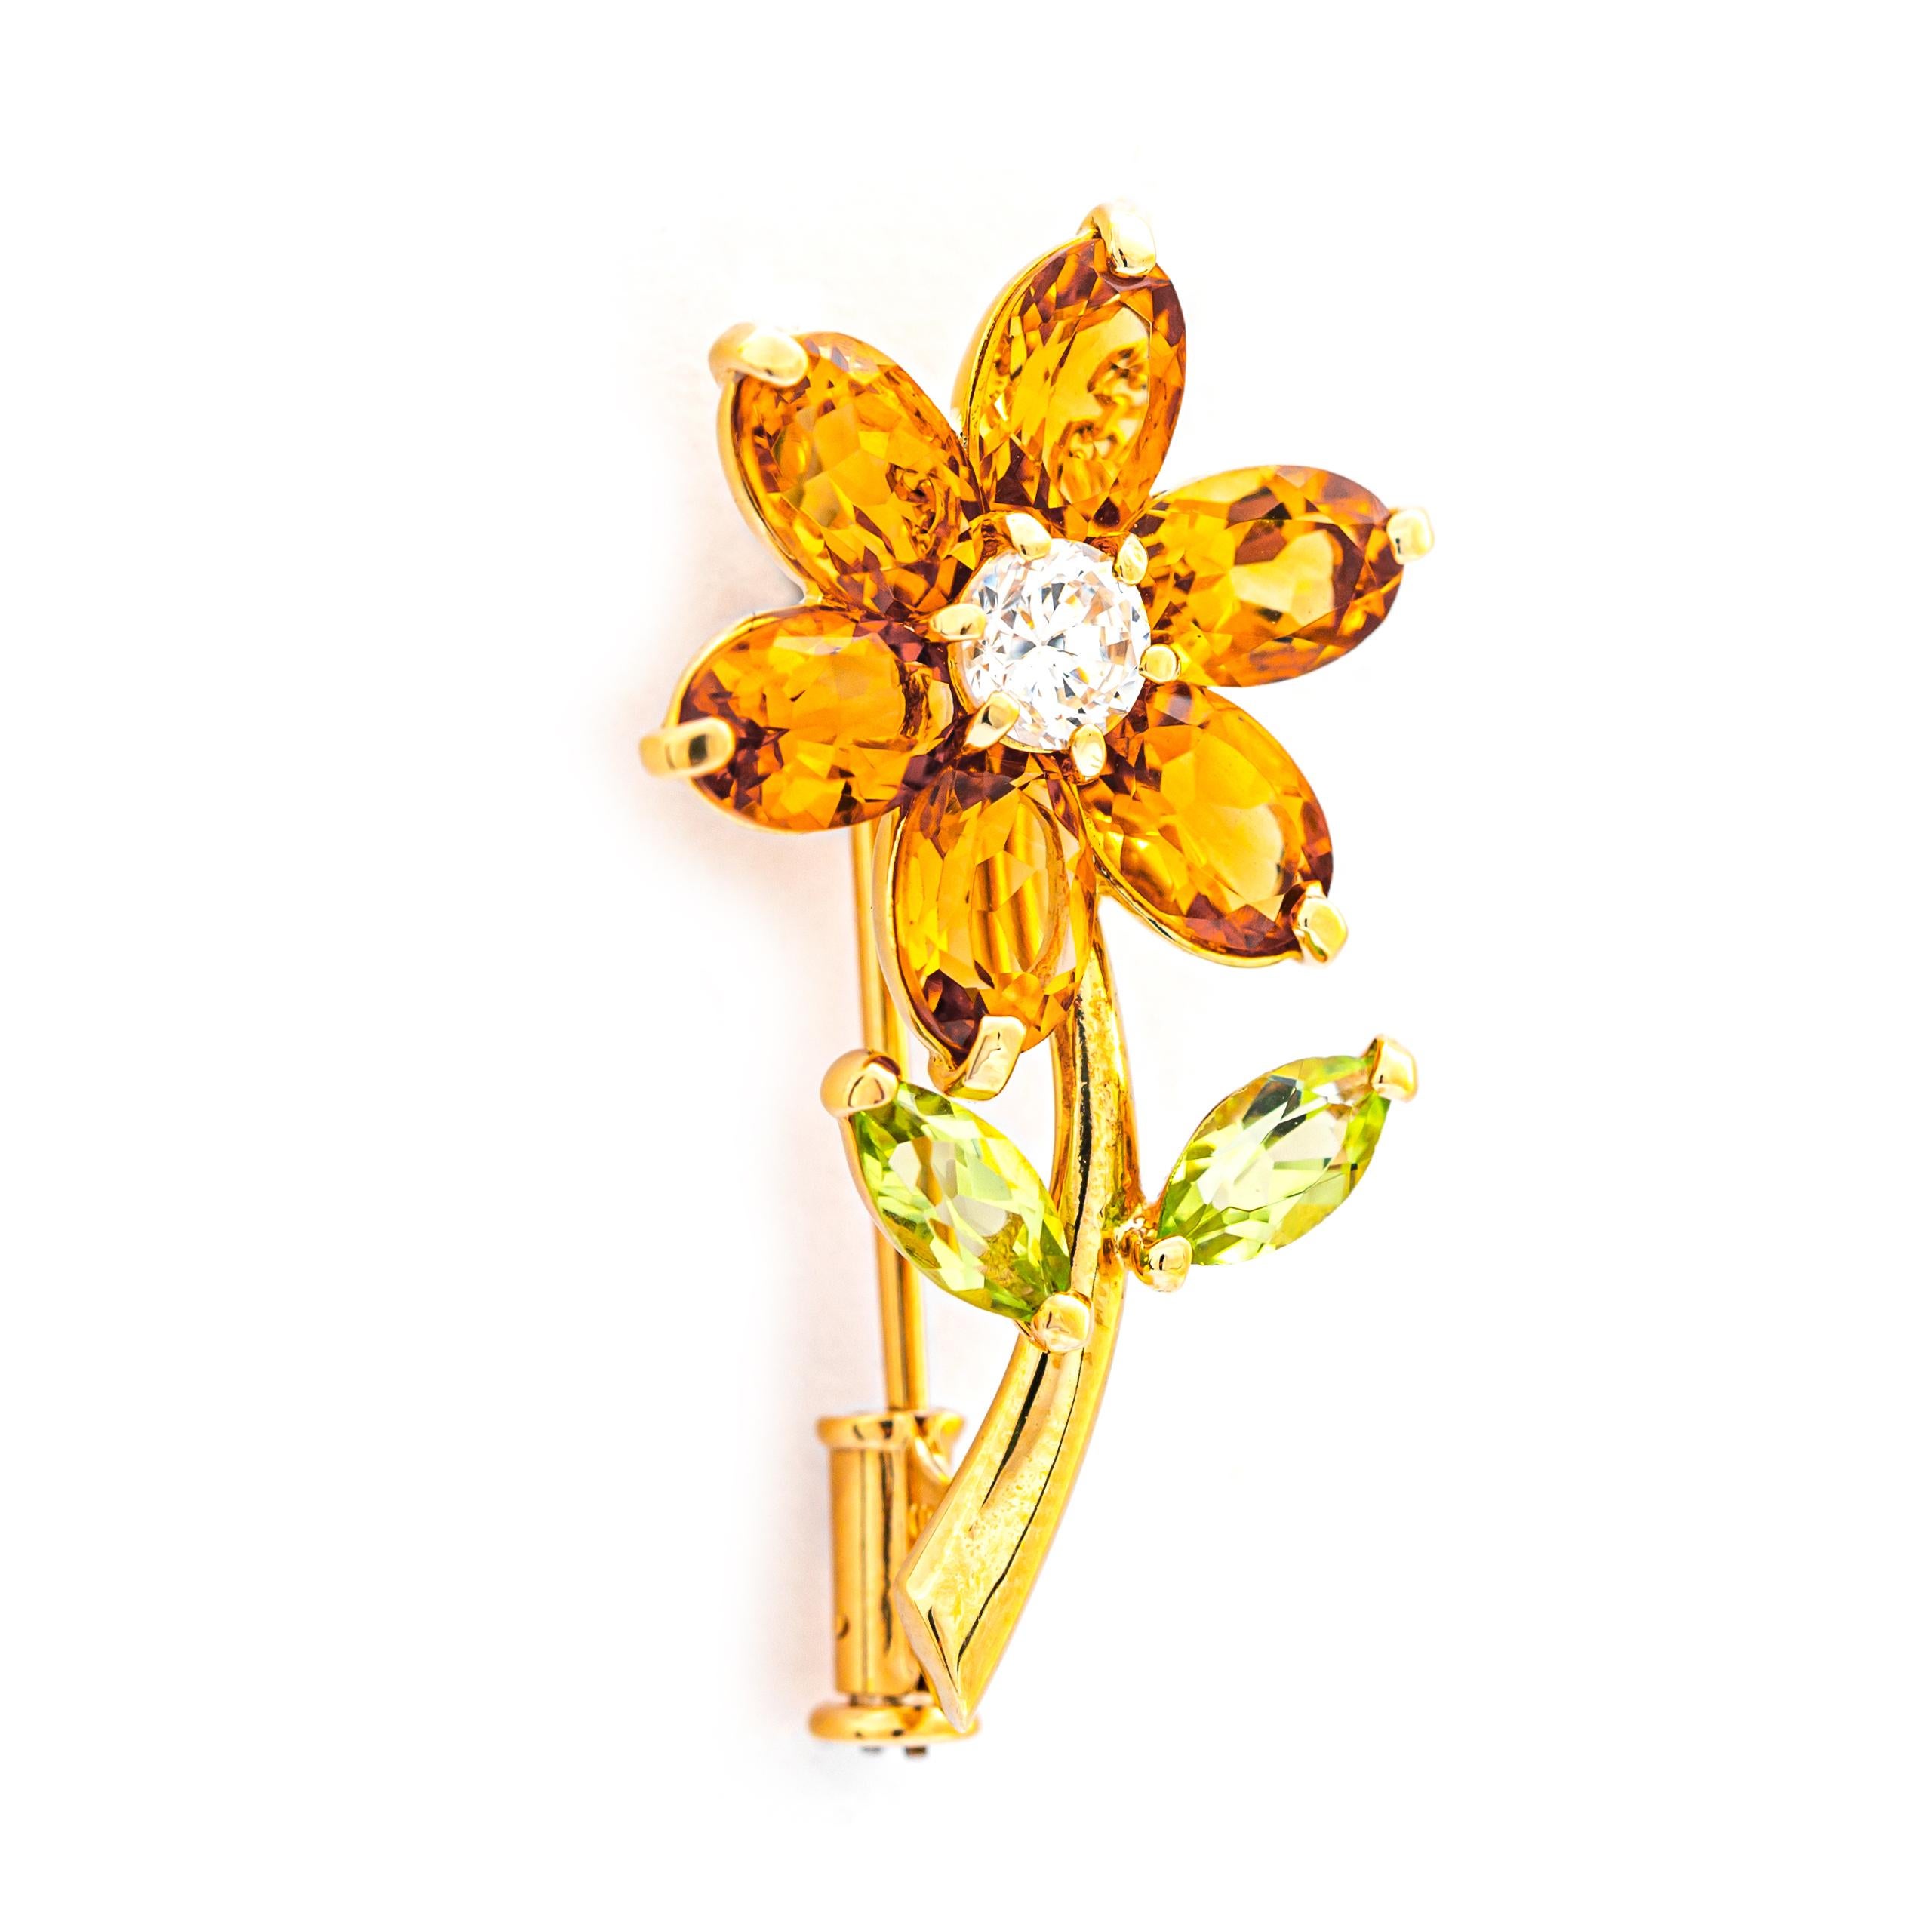 Oval Cut 5.20 ct Gemstone Mix Flower Brooch, No Reserve Price